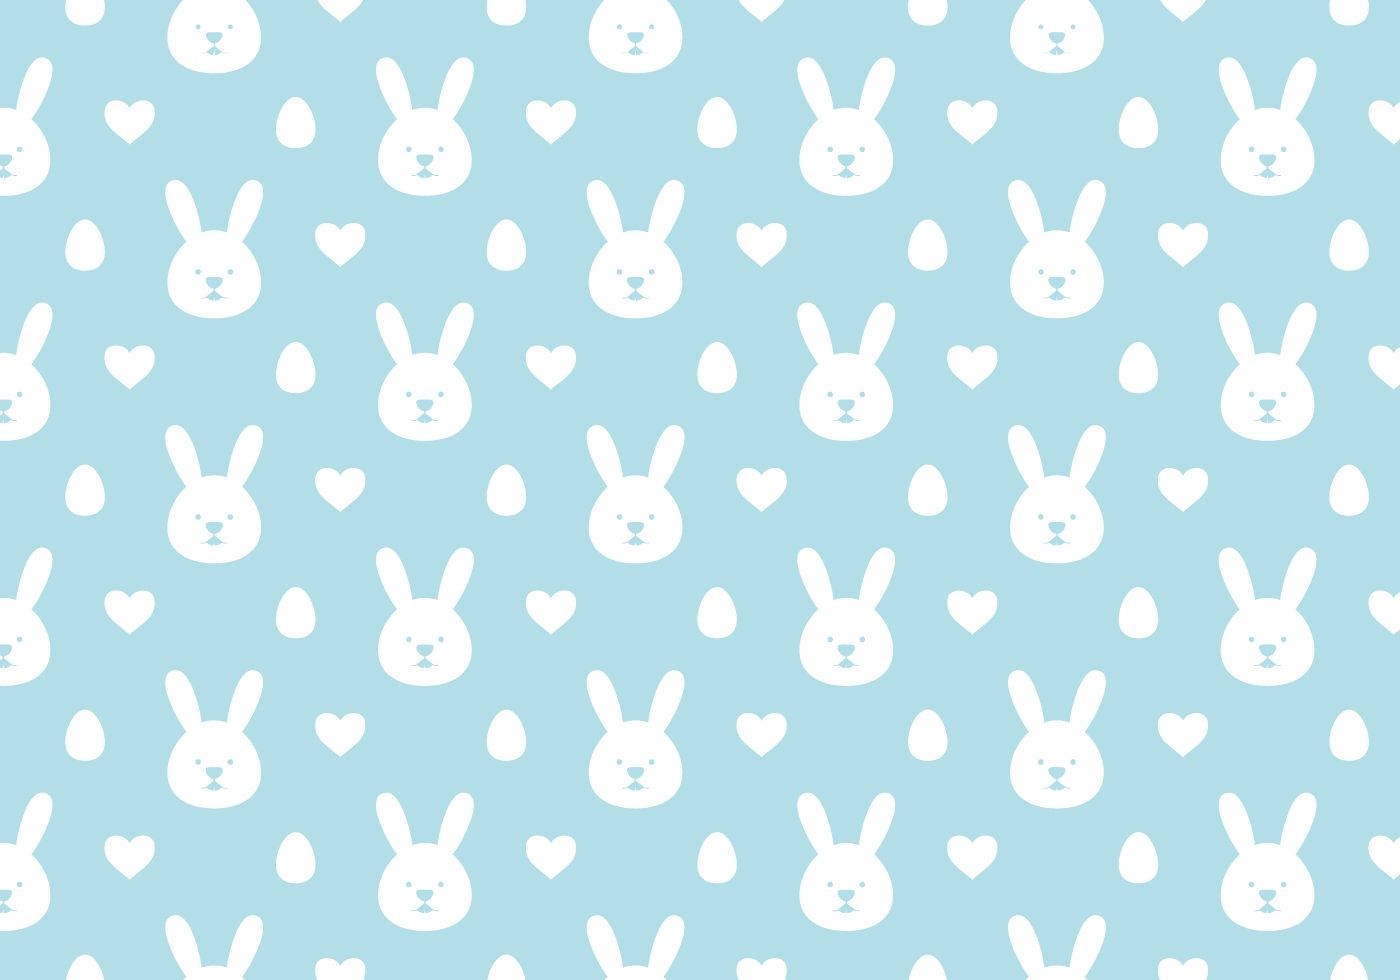 Cute Bunny Patterns With Little Hearts